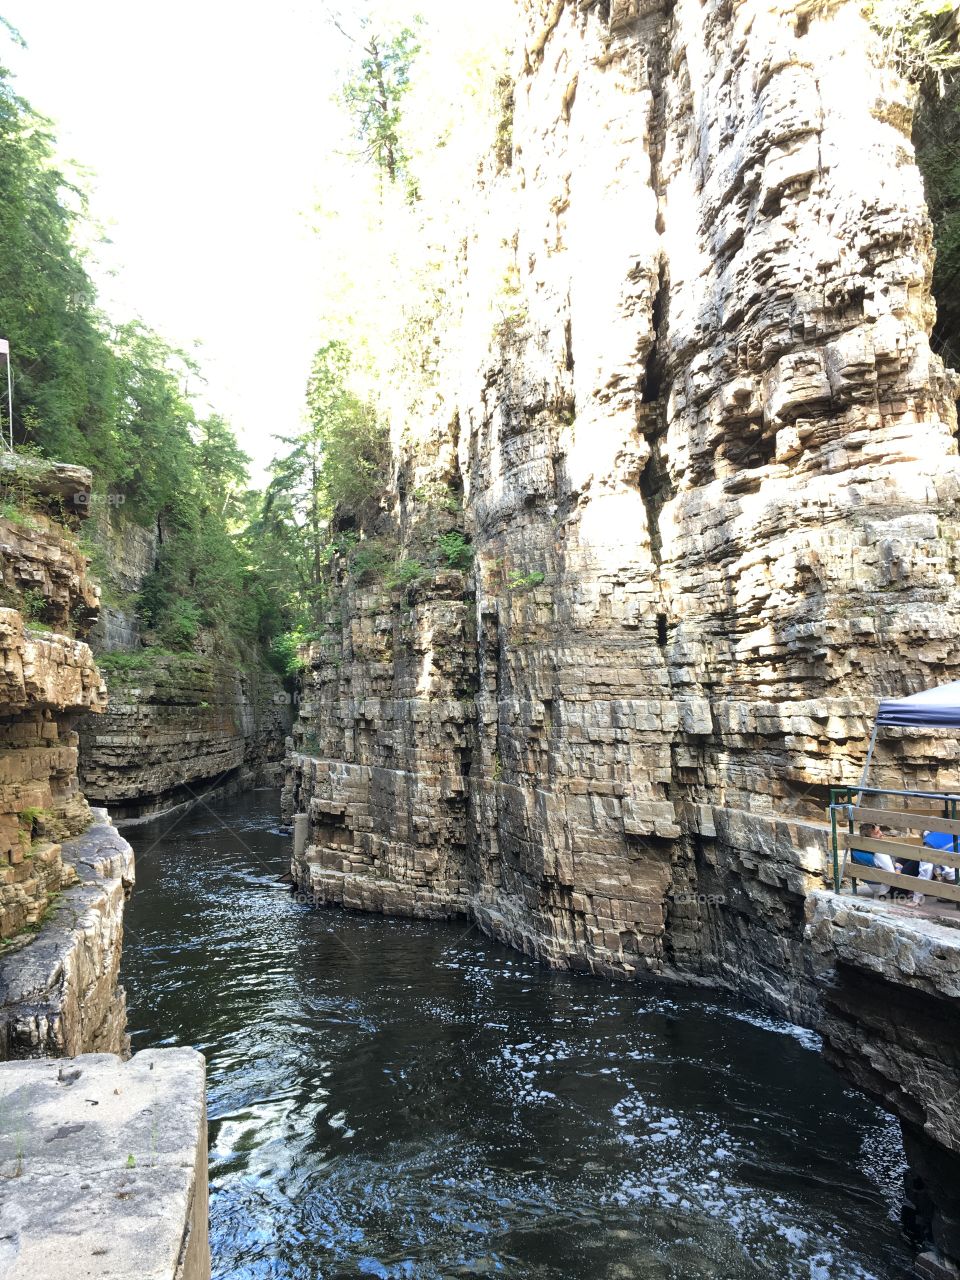 Ausable Chasm - New York
The Gorge 